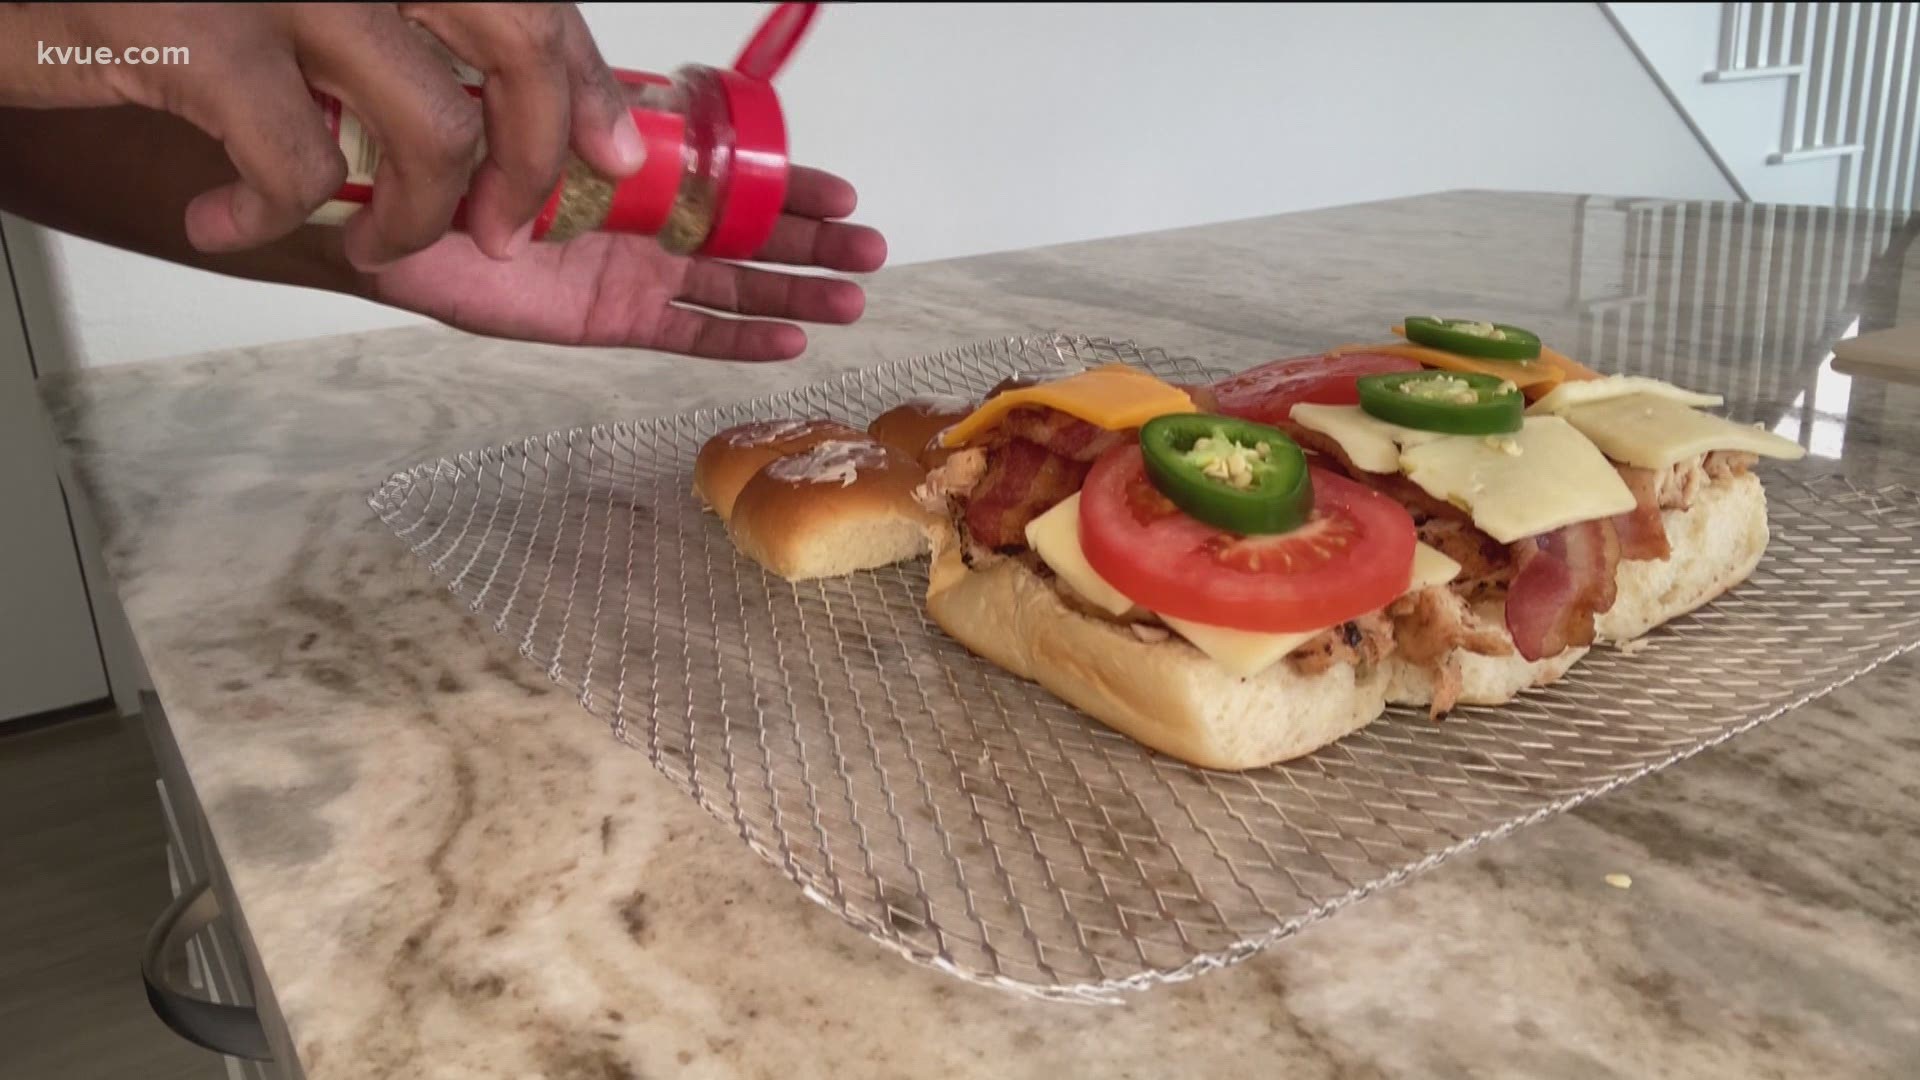 For this edition of Gameday Grilling, we show you how to make grilled chicken sliders. You won't want to put down this awesome finger food!